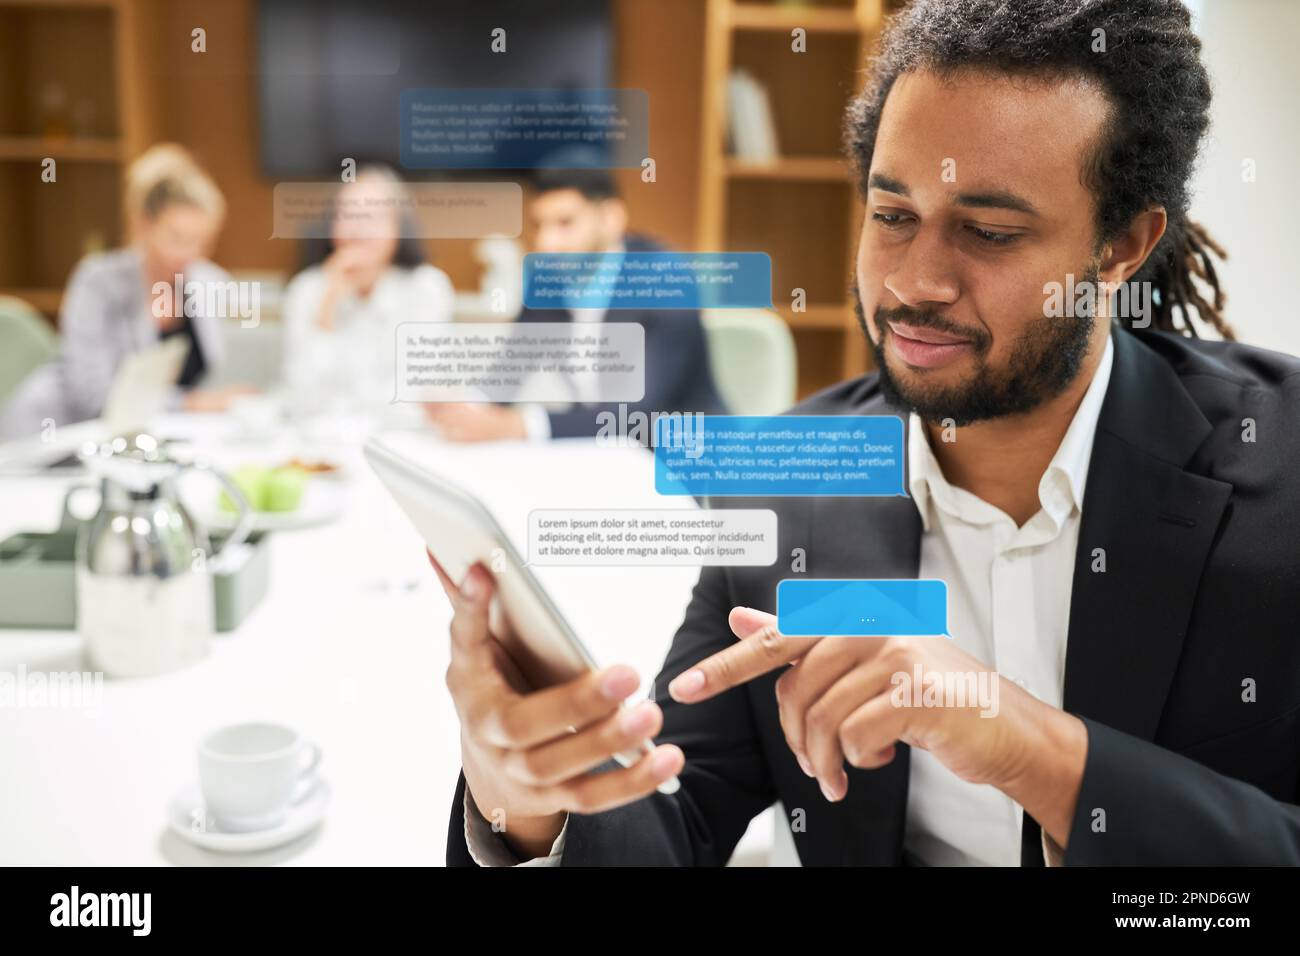 Business man typing sms or messenger message with popped up speech bubbles in conference room Stock Photo